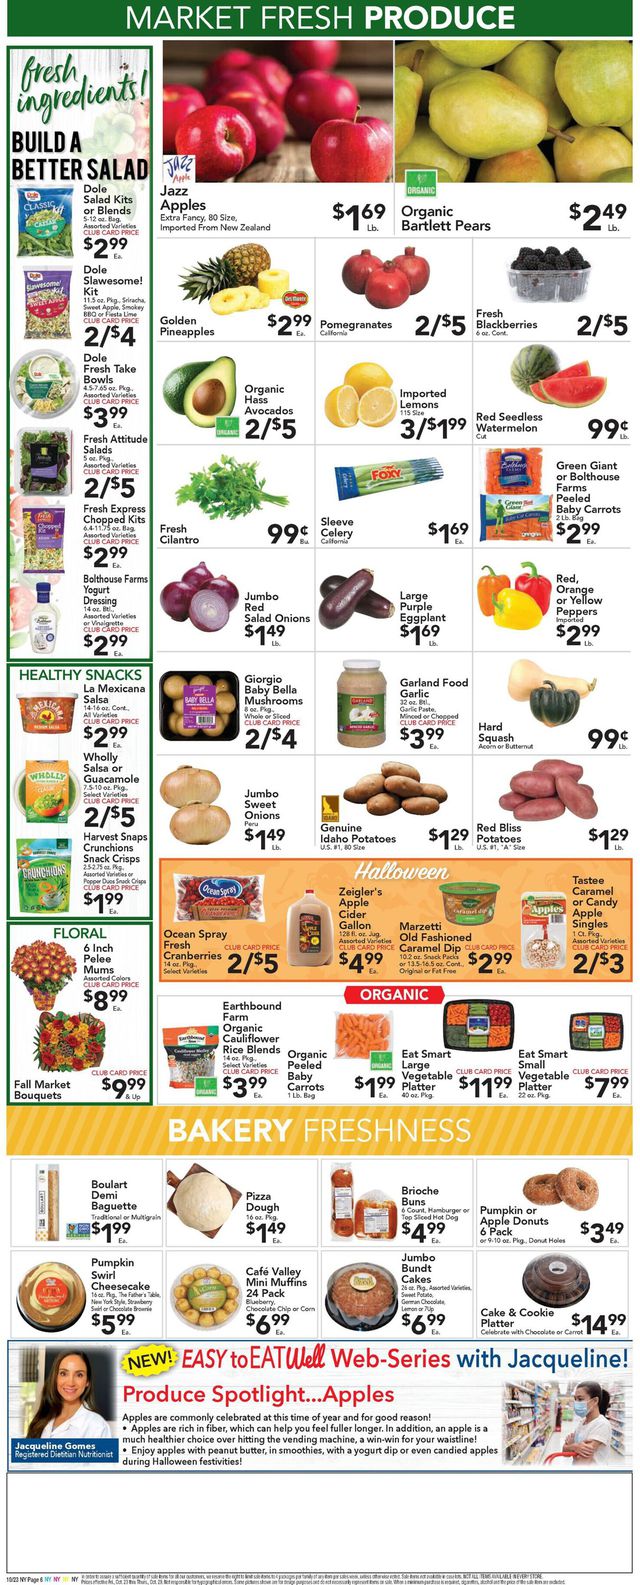 Foodtown Ad from 10/23/2020